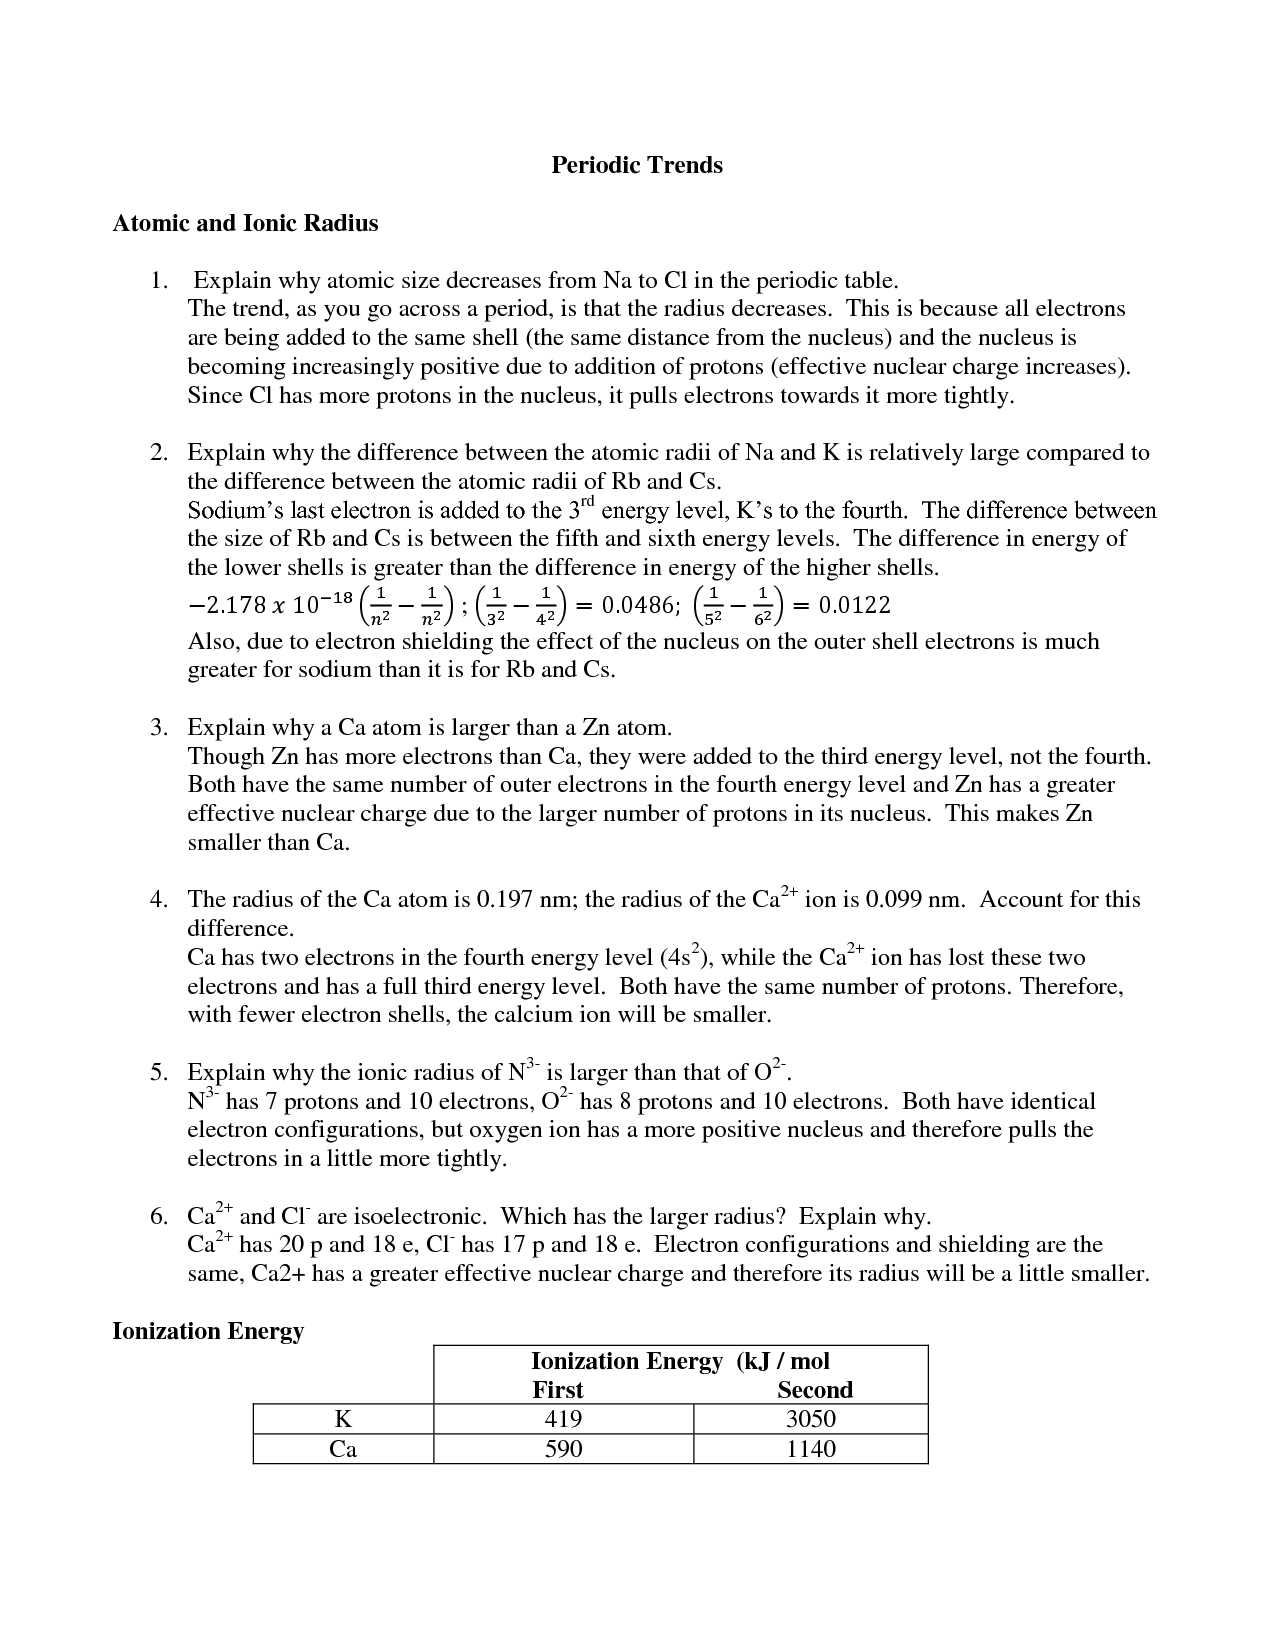 11-best-images-of-periodic-trends-worksheet-with-answers-periodic-trends-worksheet-answers